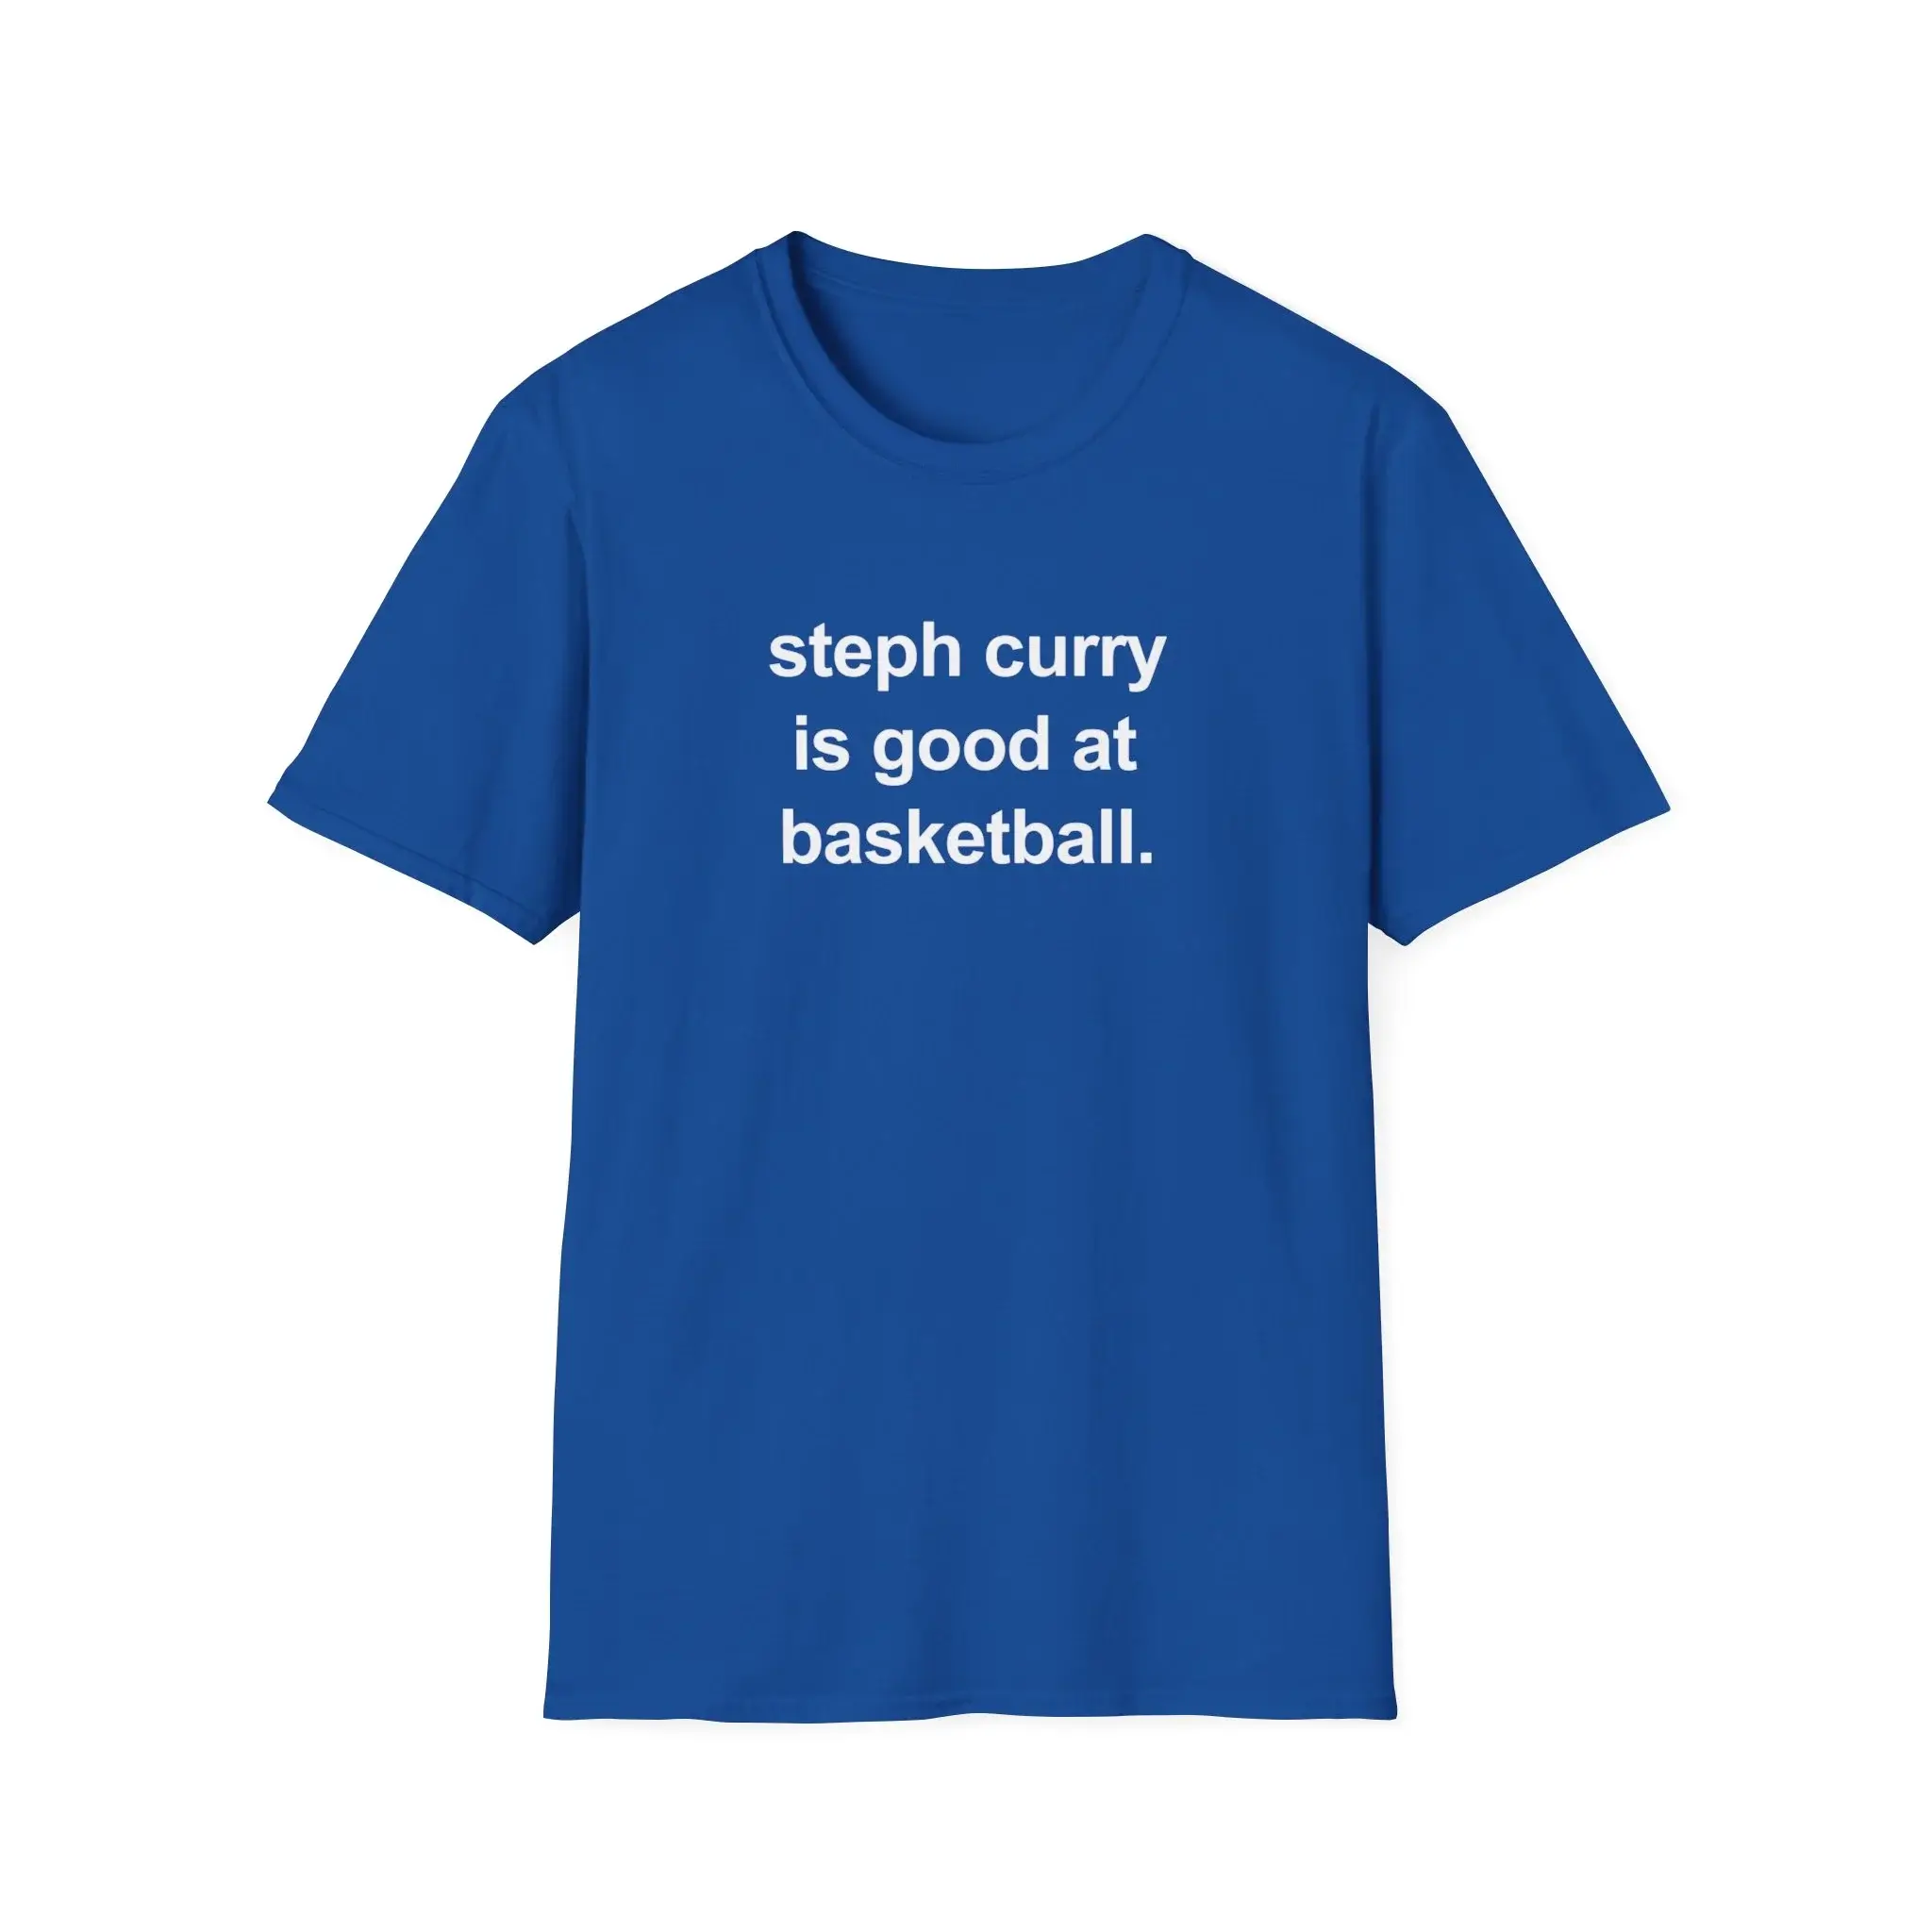 Steph curry is good at basketball shirt